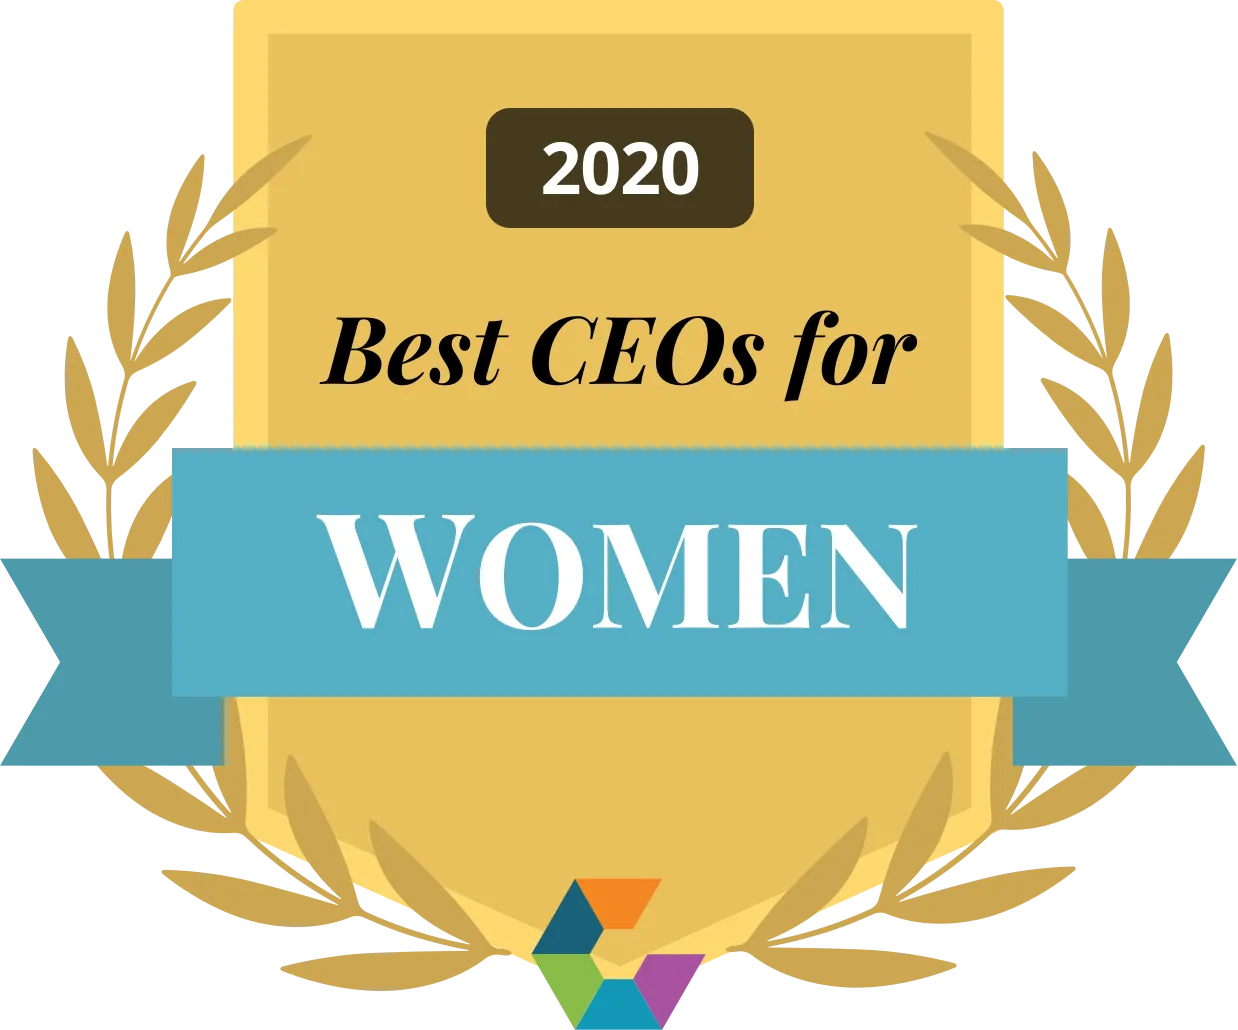 Comparably- Best CEOs for Women